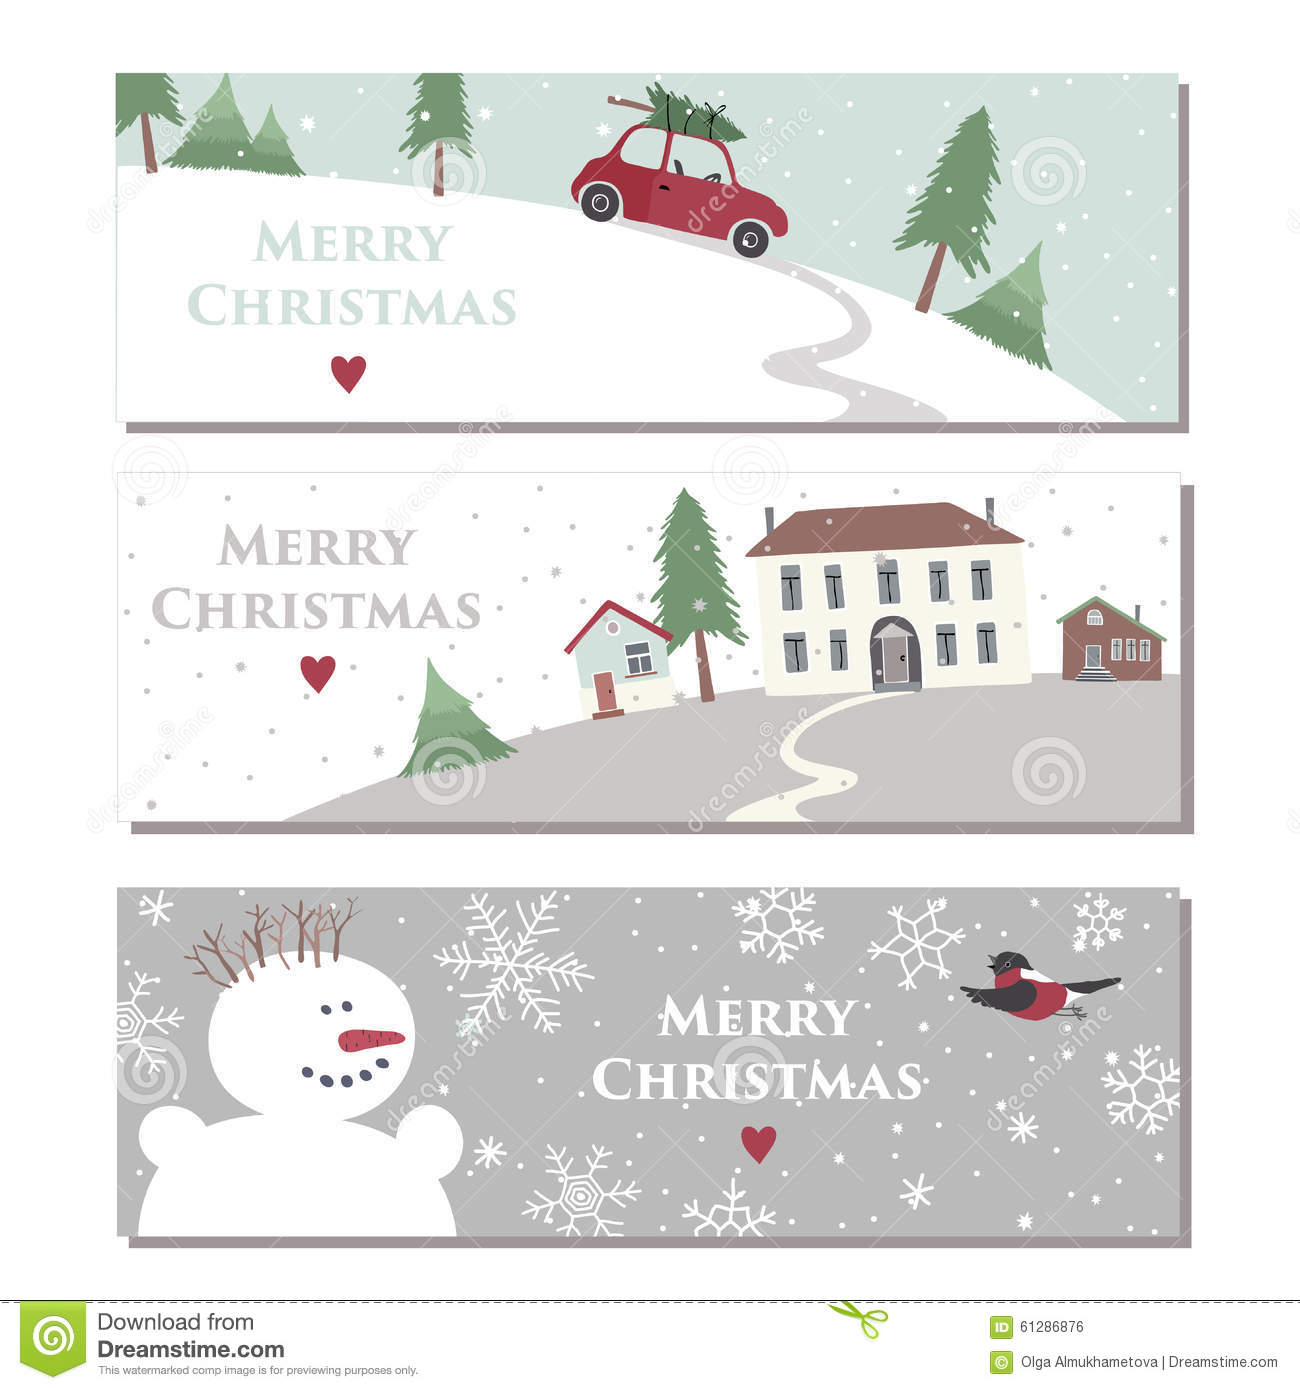 Of Three Website Horizontal Banners For Merry Christmas Celebration